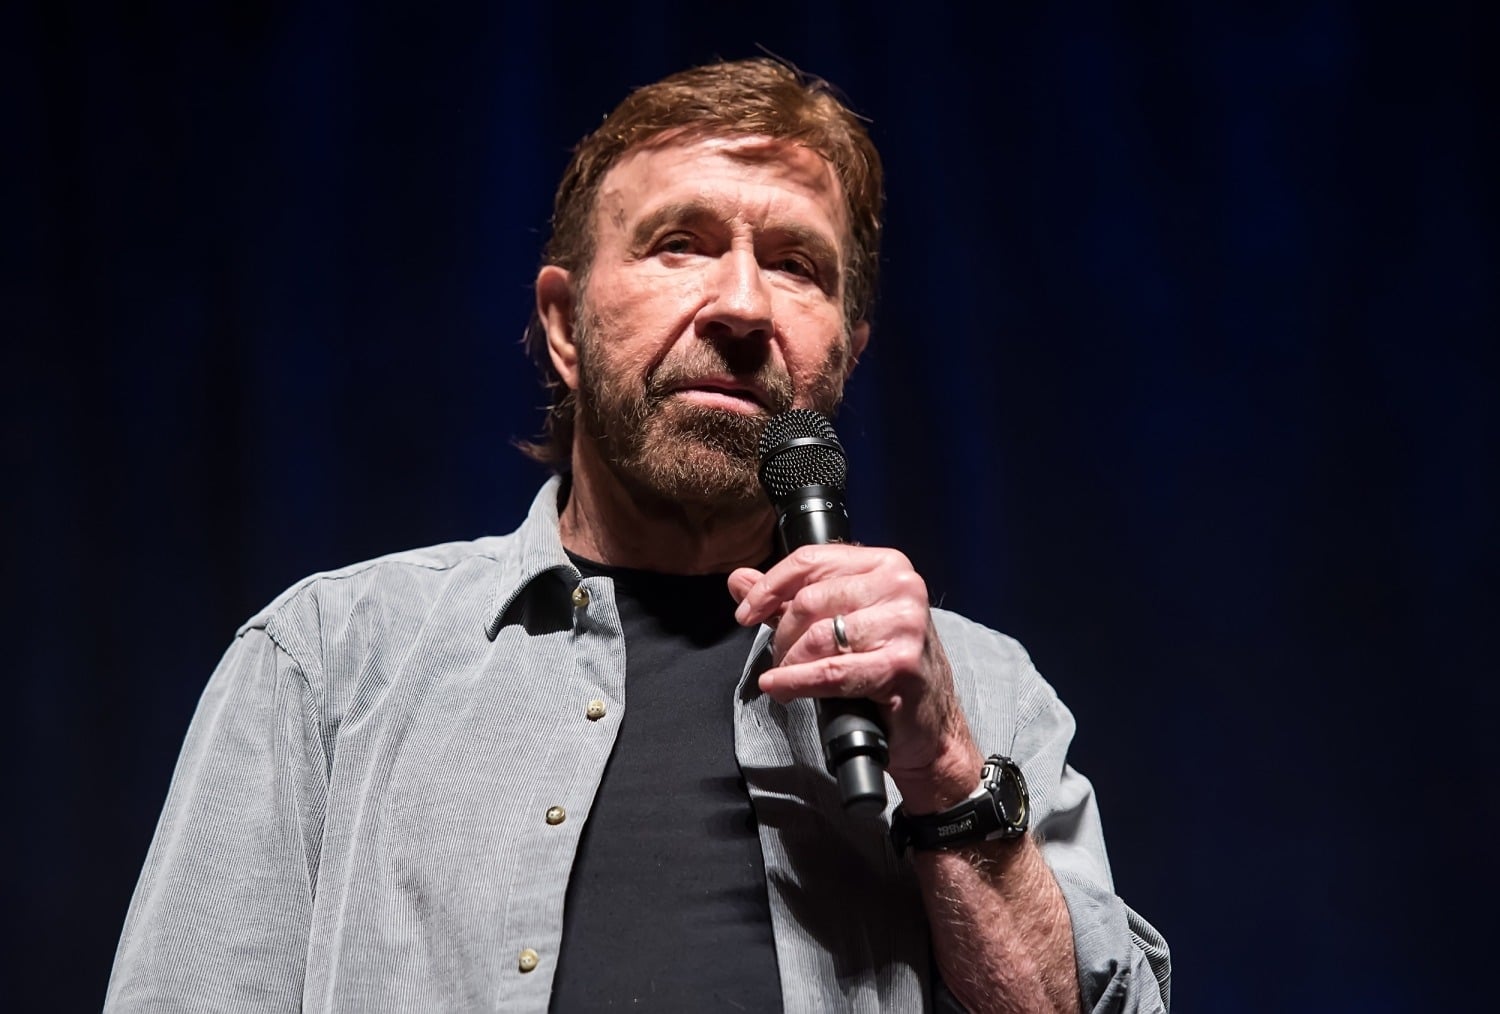 Chuck Norris was not at pro-Tump rally, viral photo was of 'look-alike,'  representative says